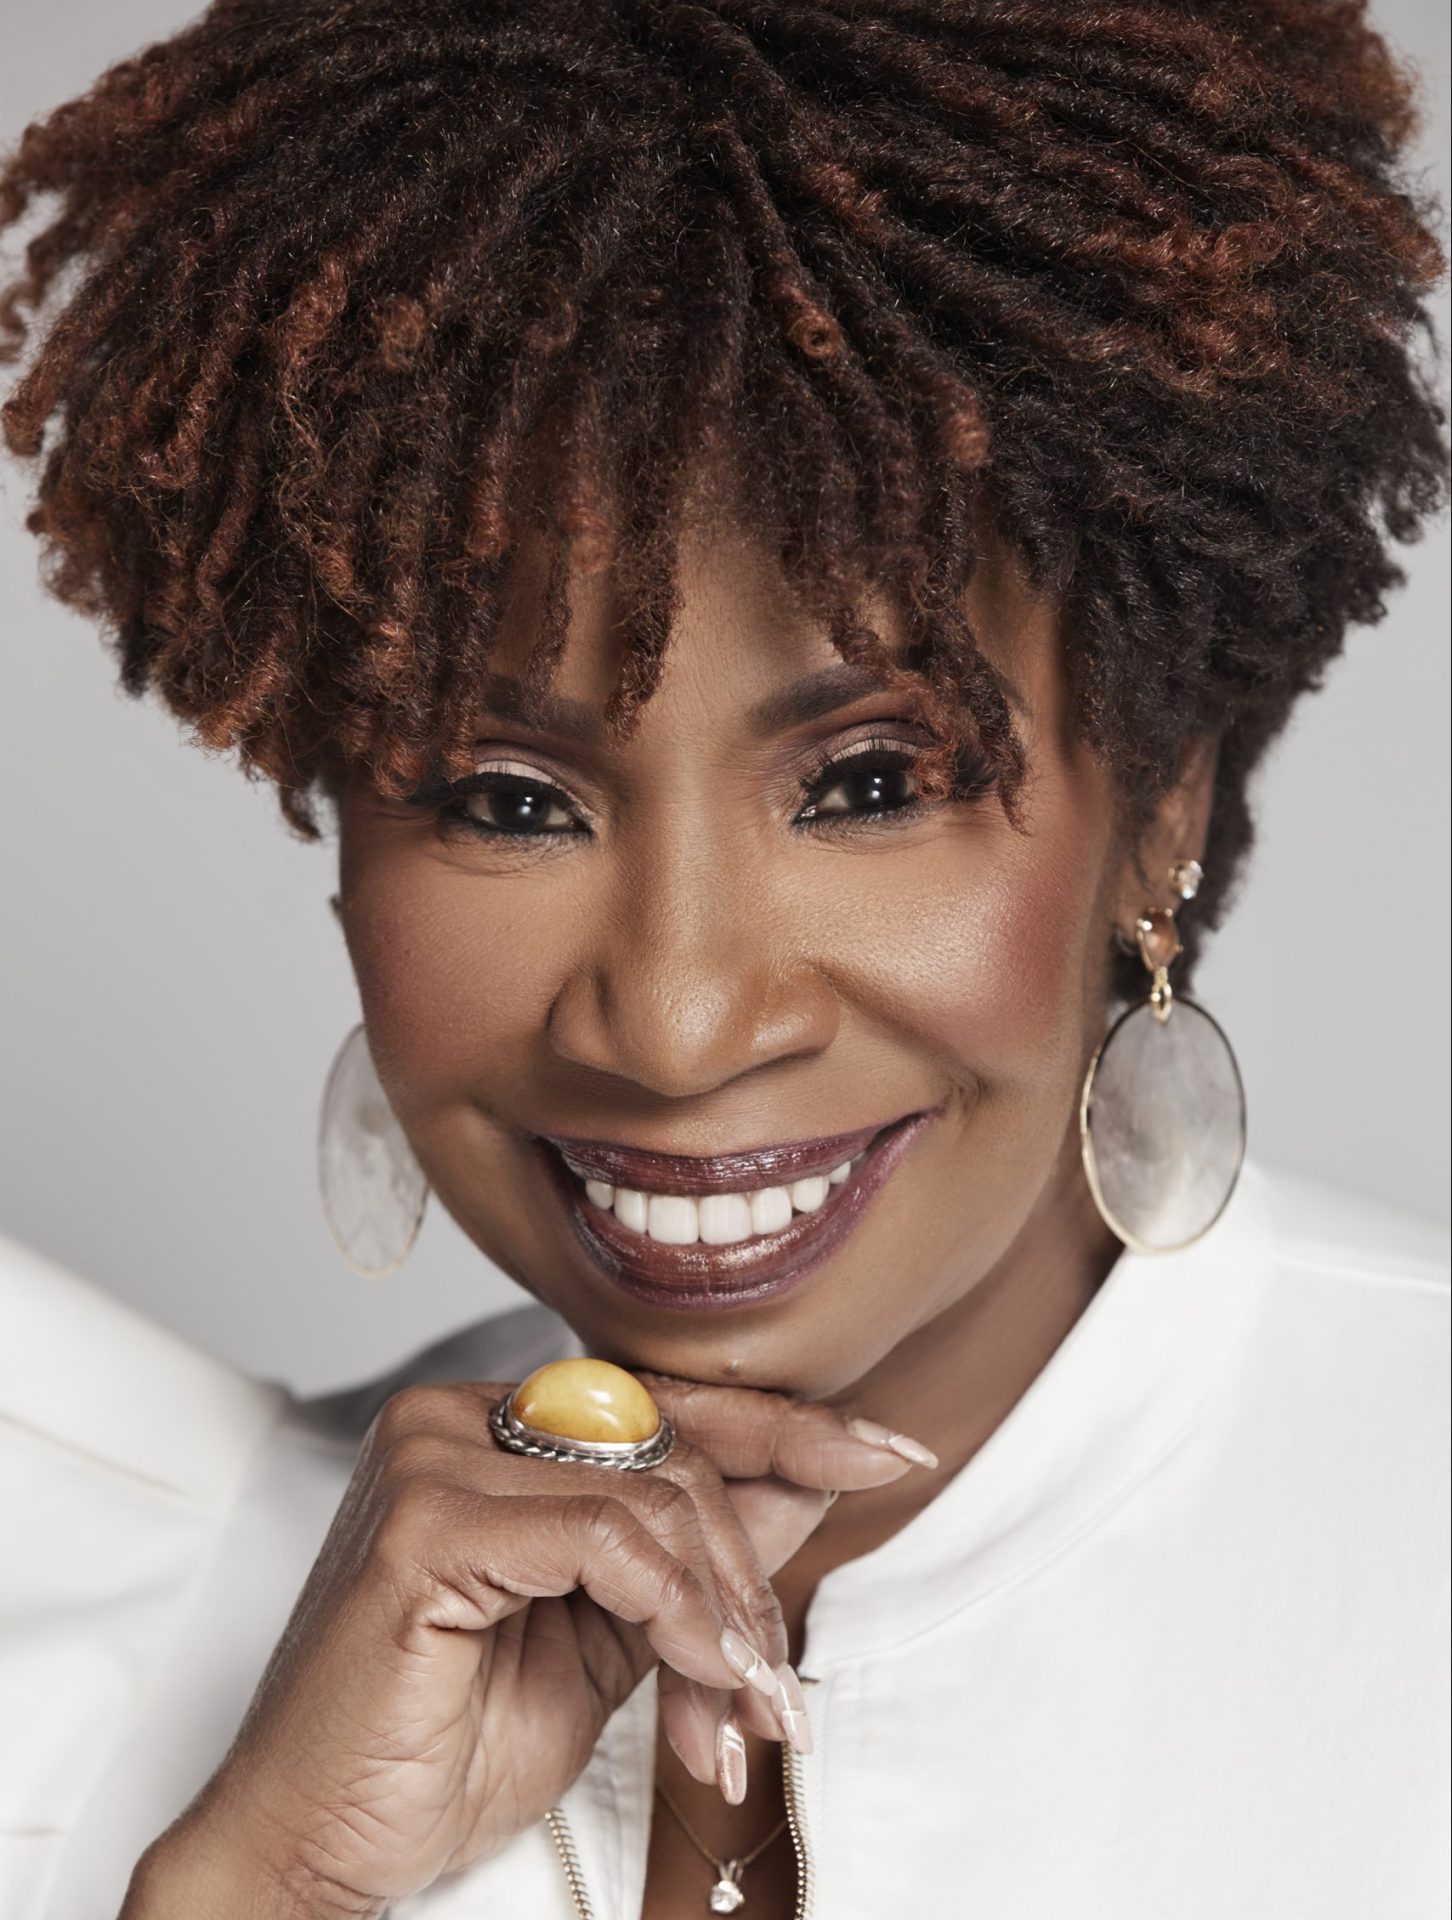 Iyanla Vanzant says pandemic offers opportunity to find inner vision